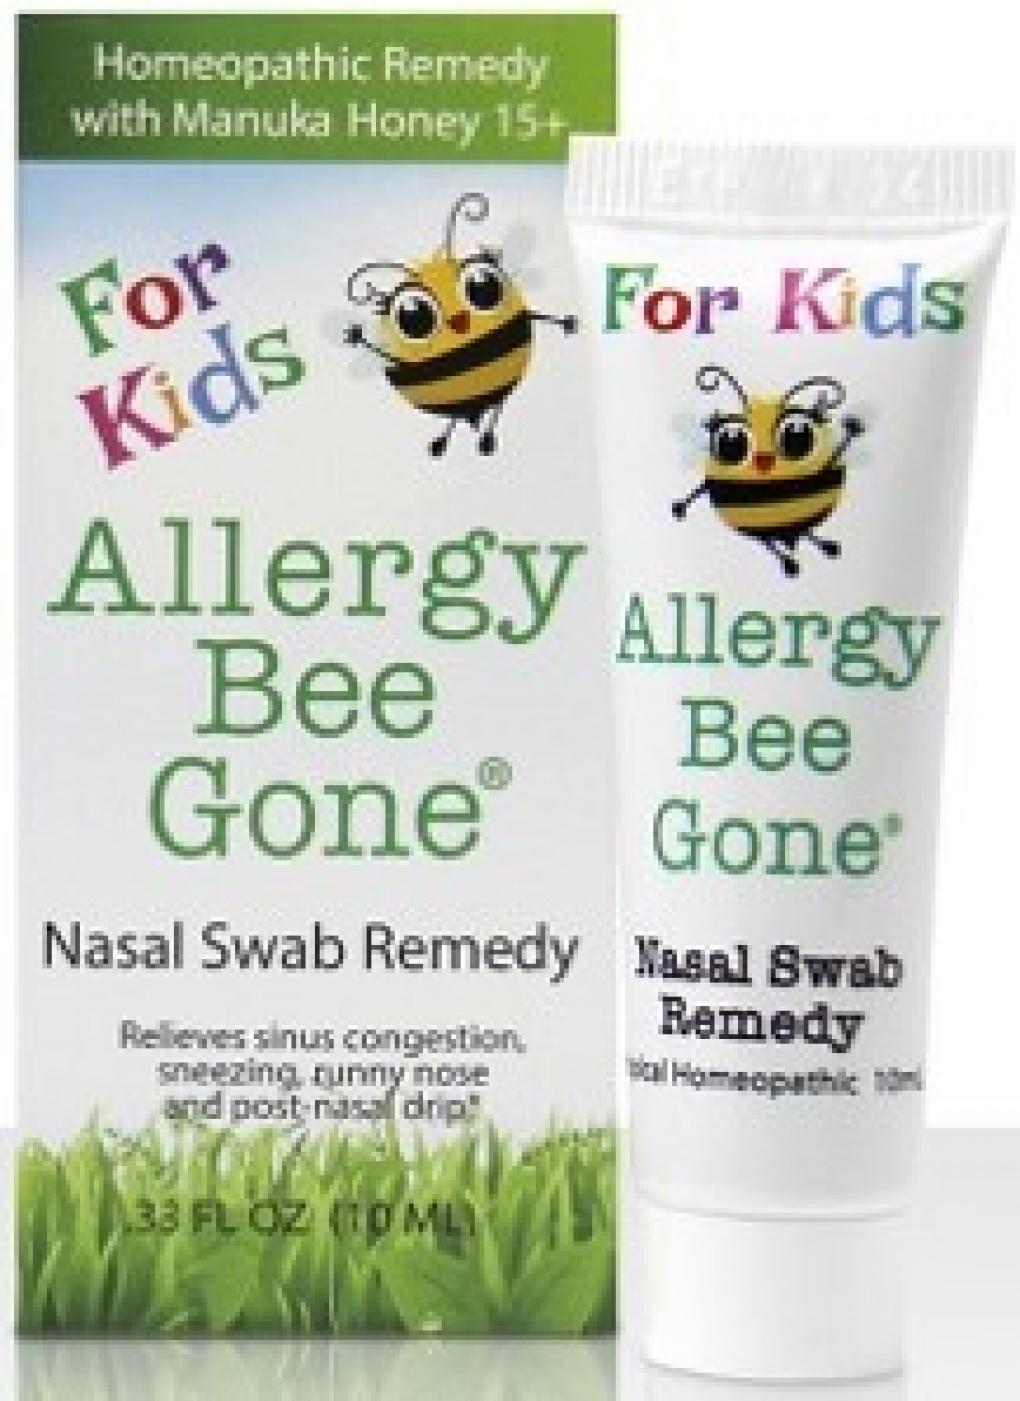 Bacteria and Mold Found in Allergy Bee Gone® Nasal Swabs